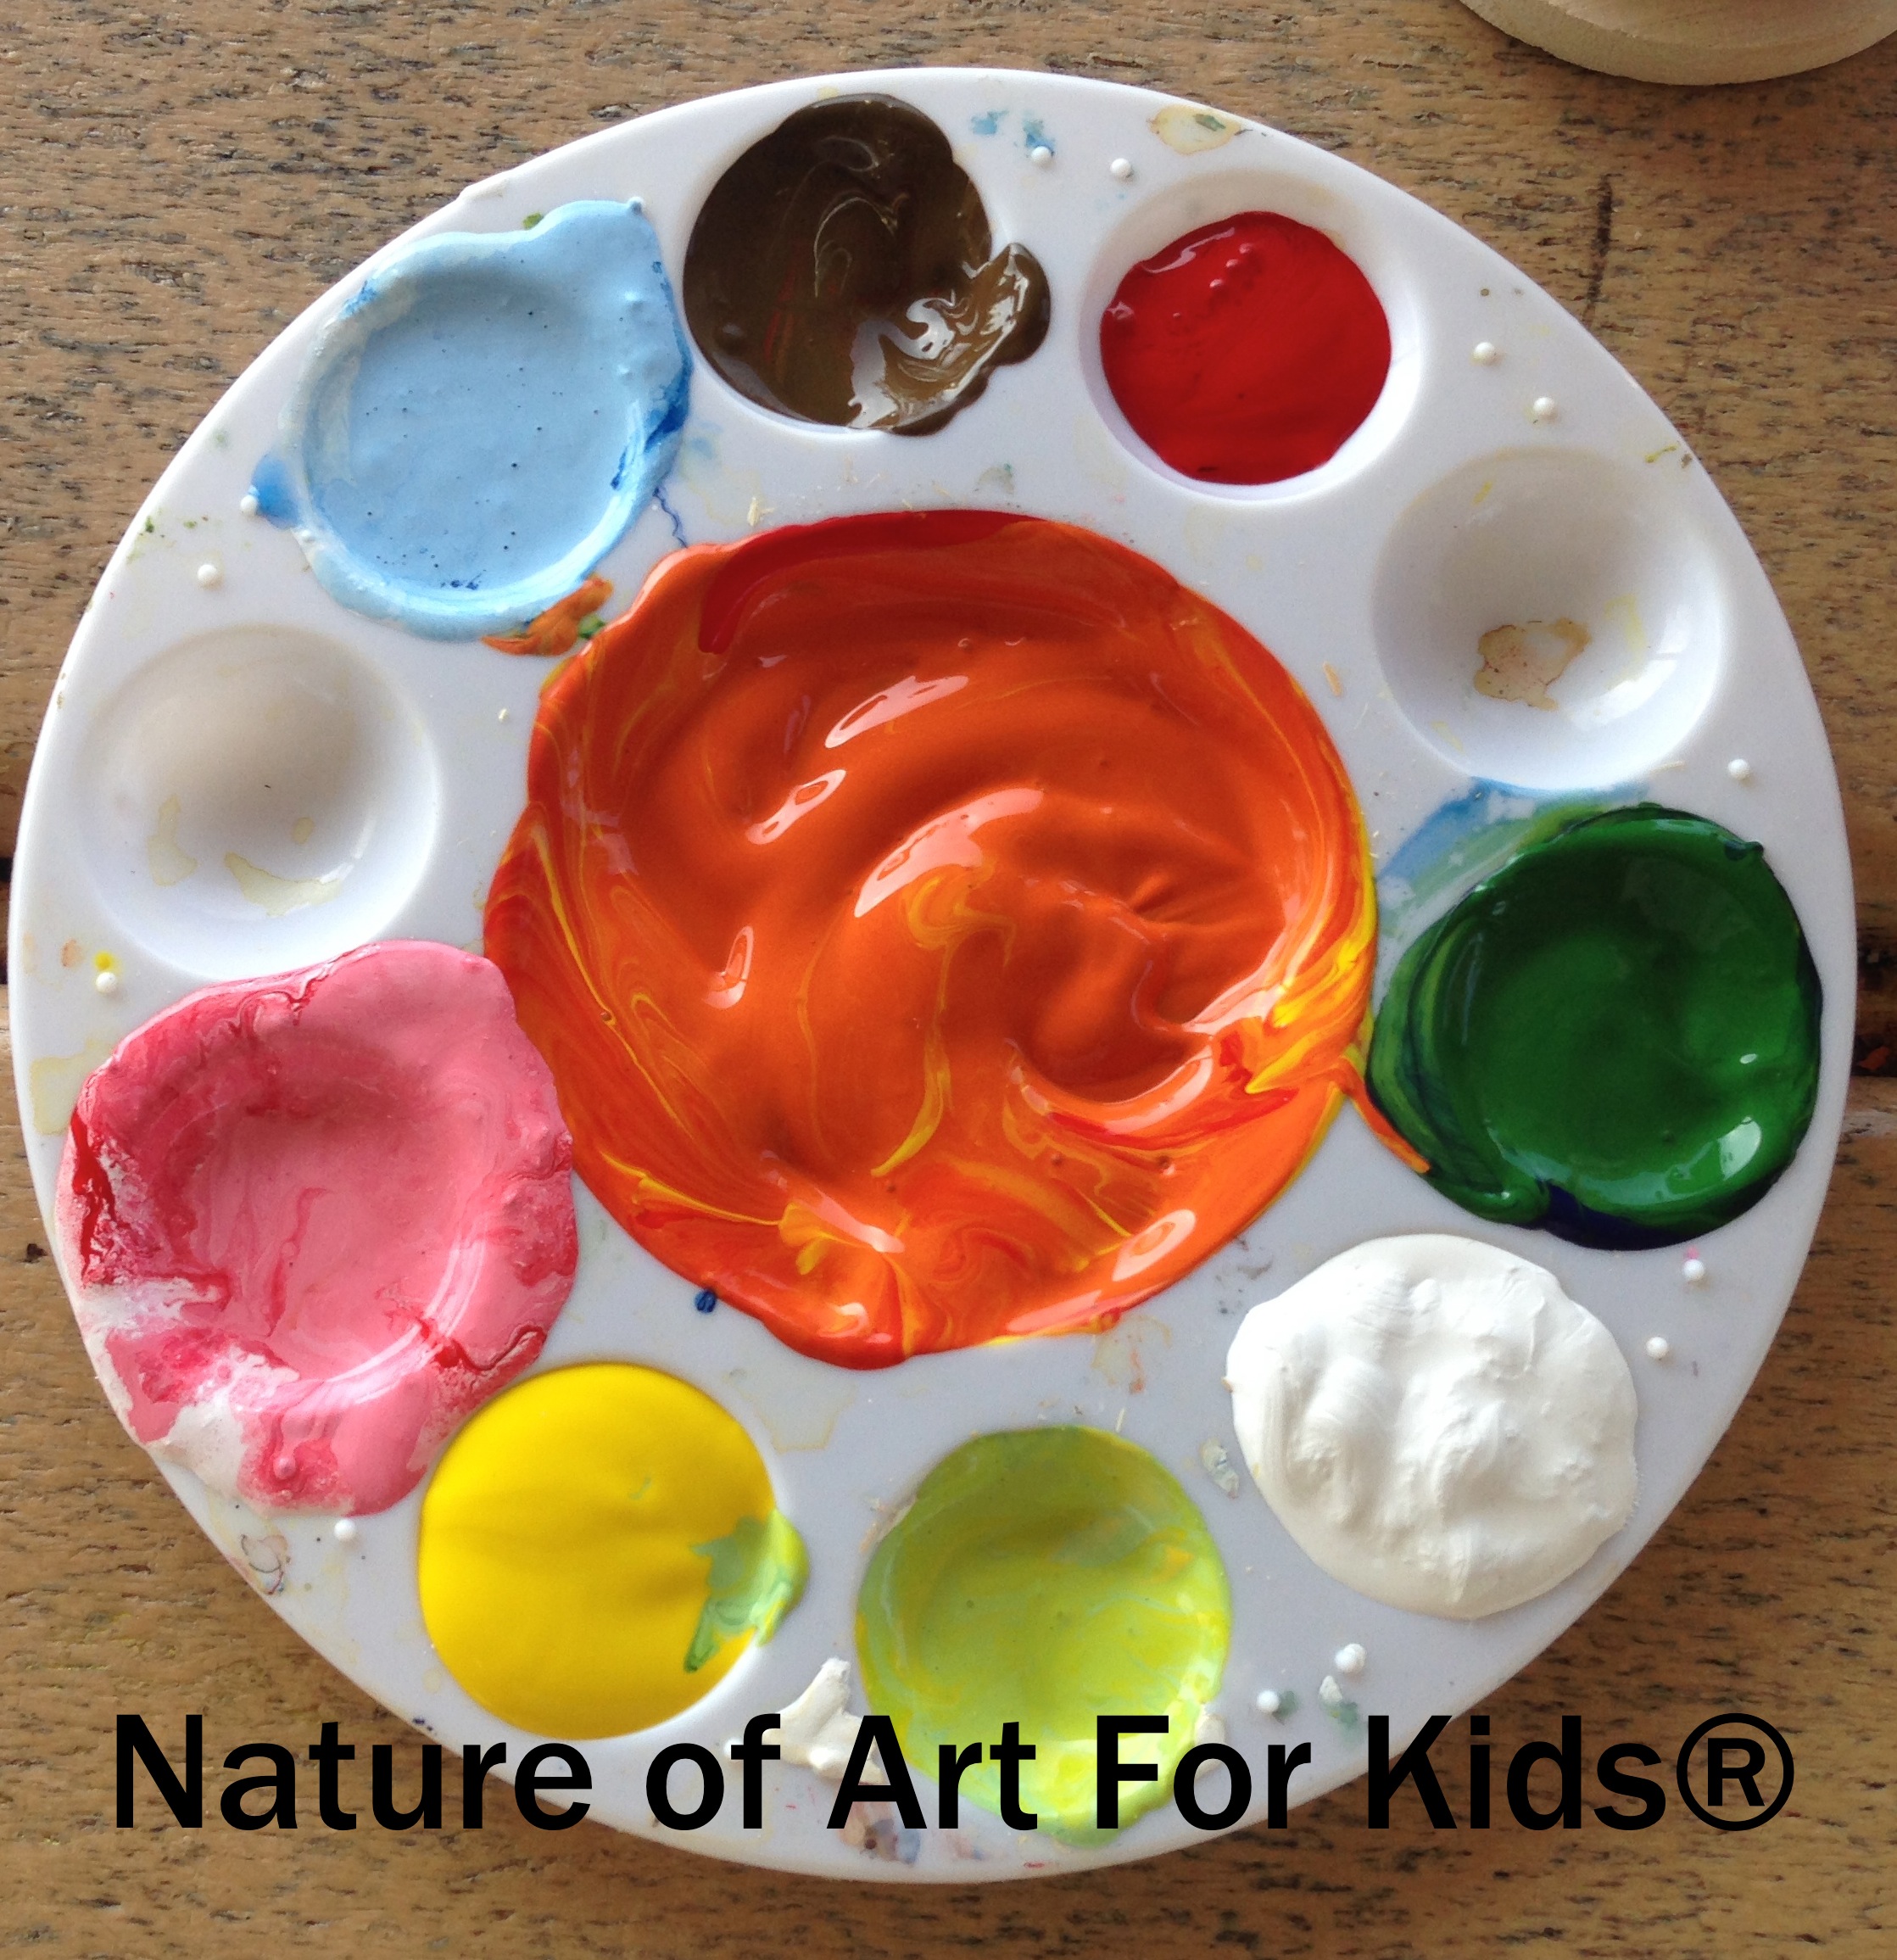 Kids Paints, Acrylic or Tempera